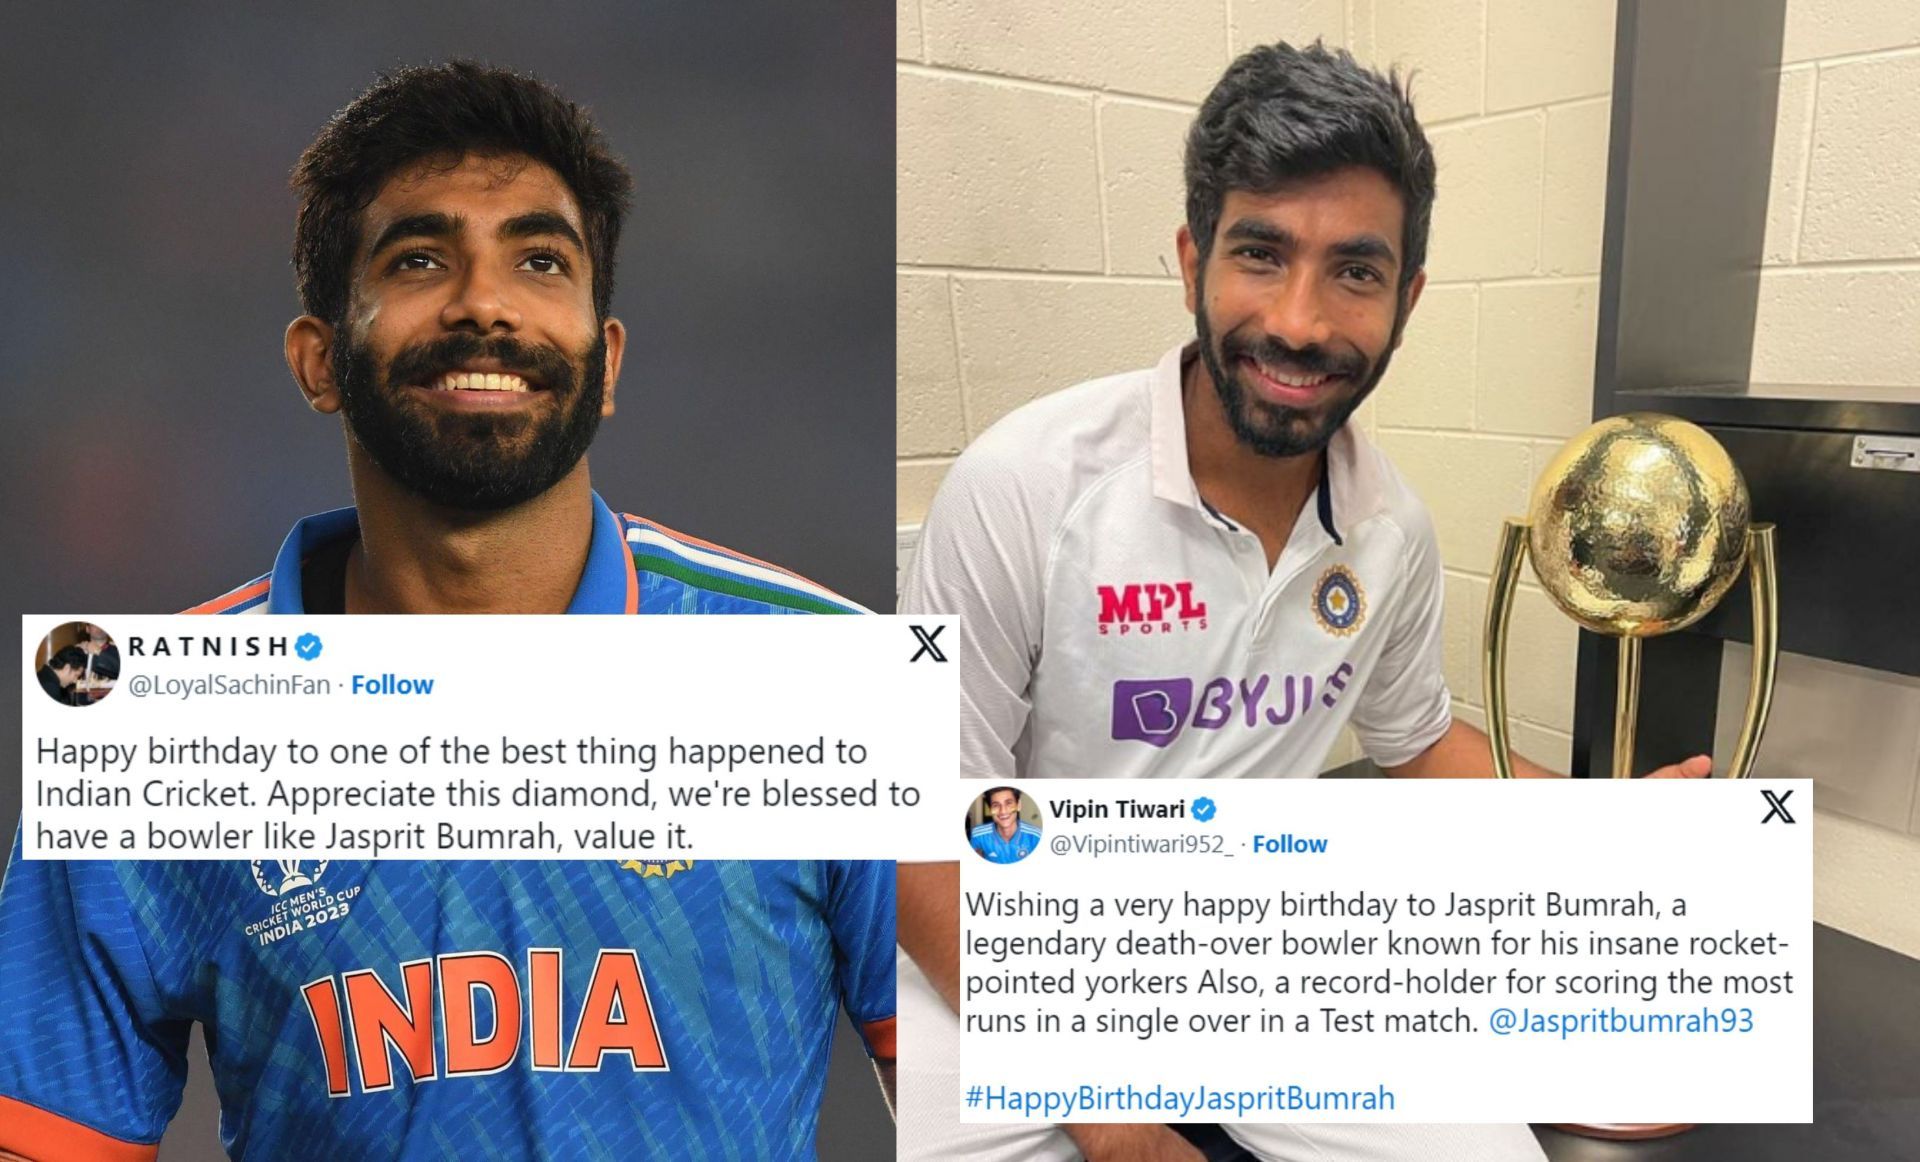 Jasprit Bumrah received special wishes as he turned 30 today.